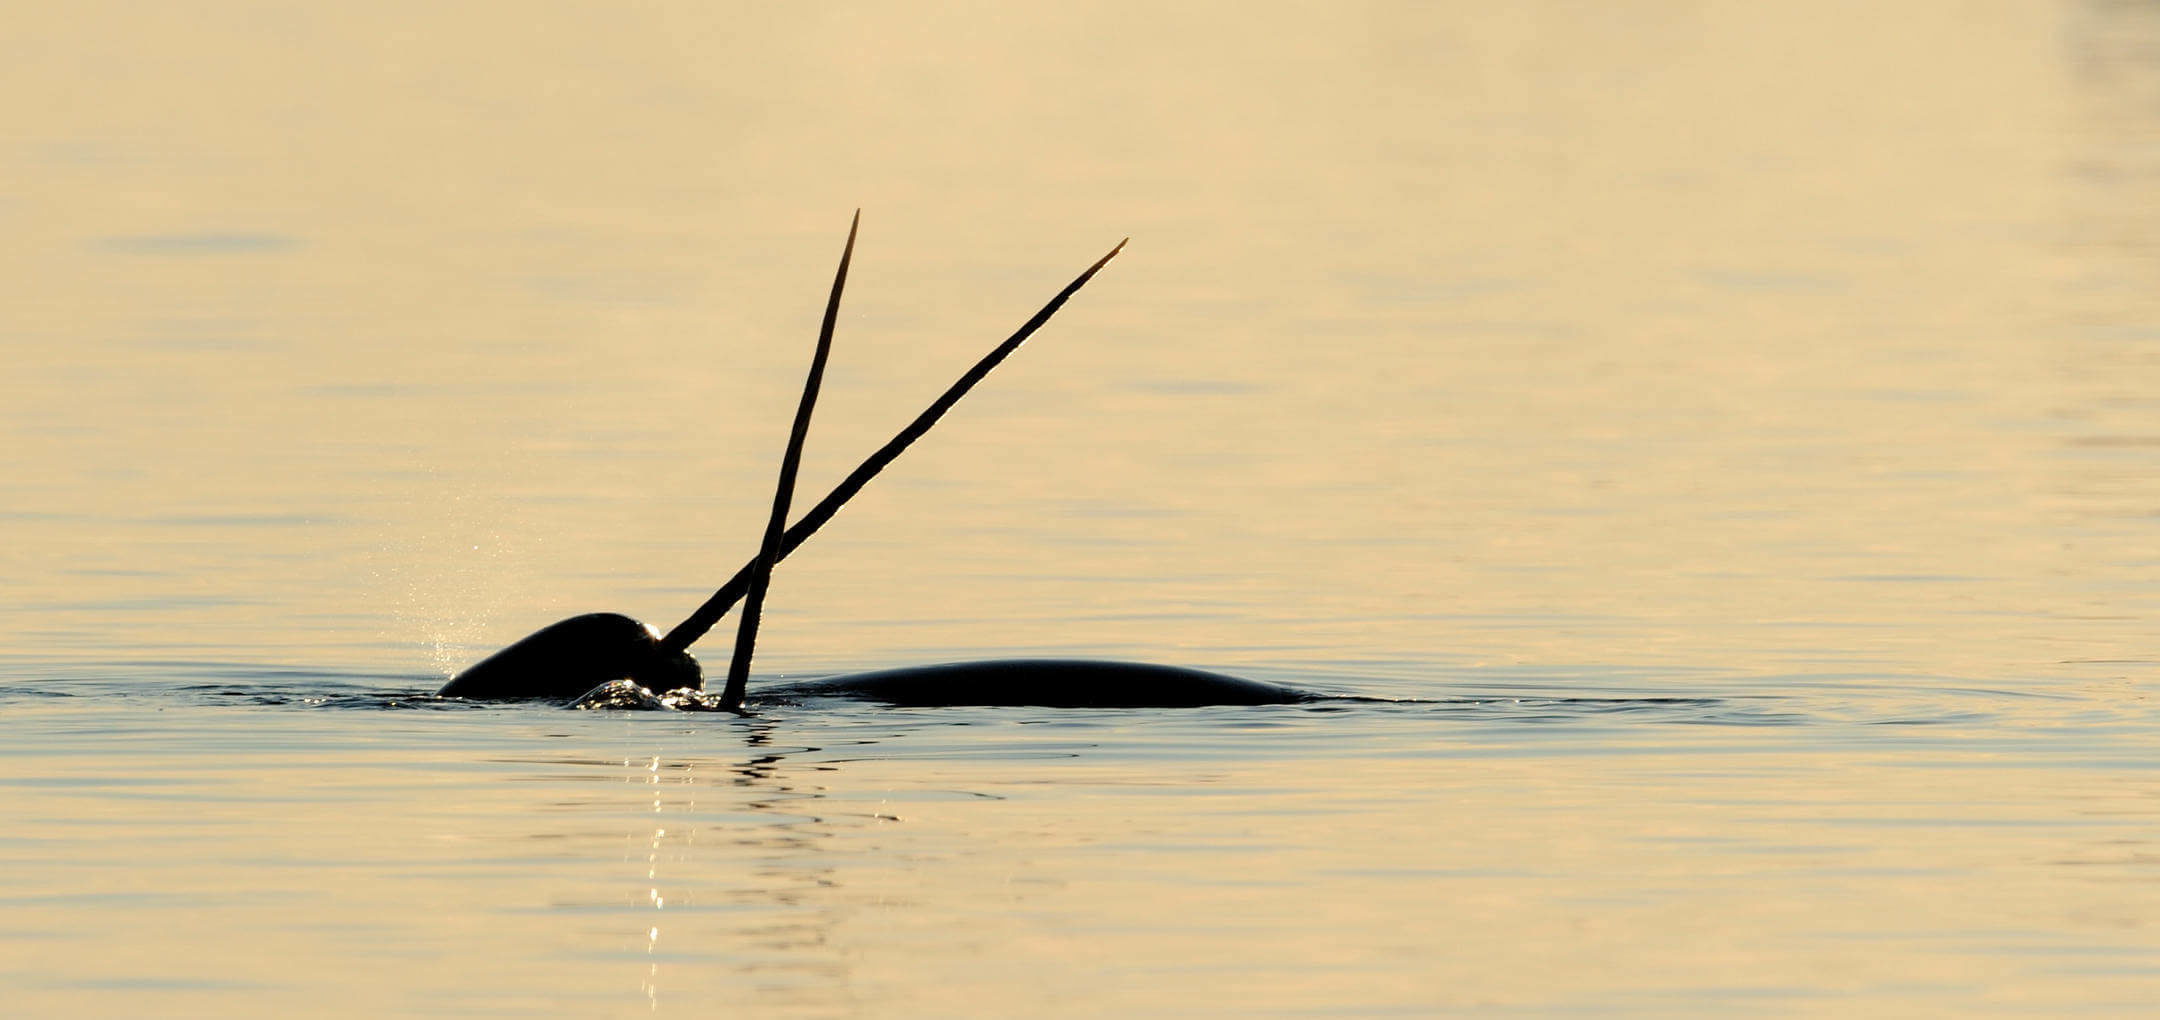 Narwhal crossing tusks above water surface. Baffin Island, Nunavut, Canada